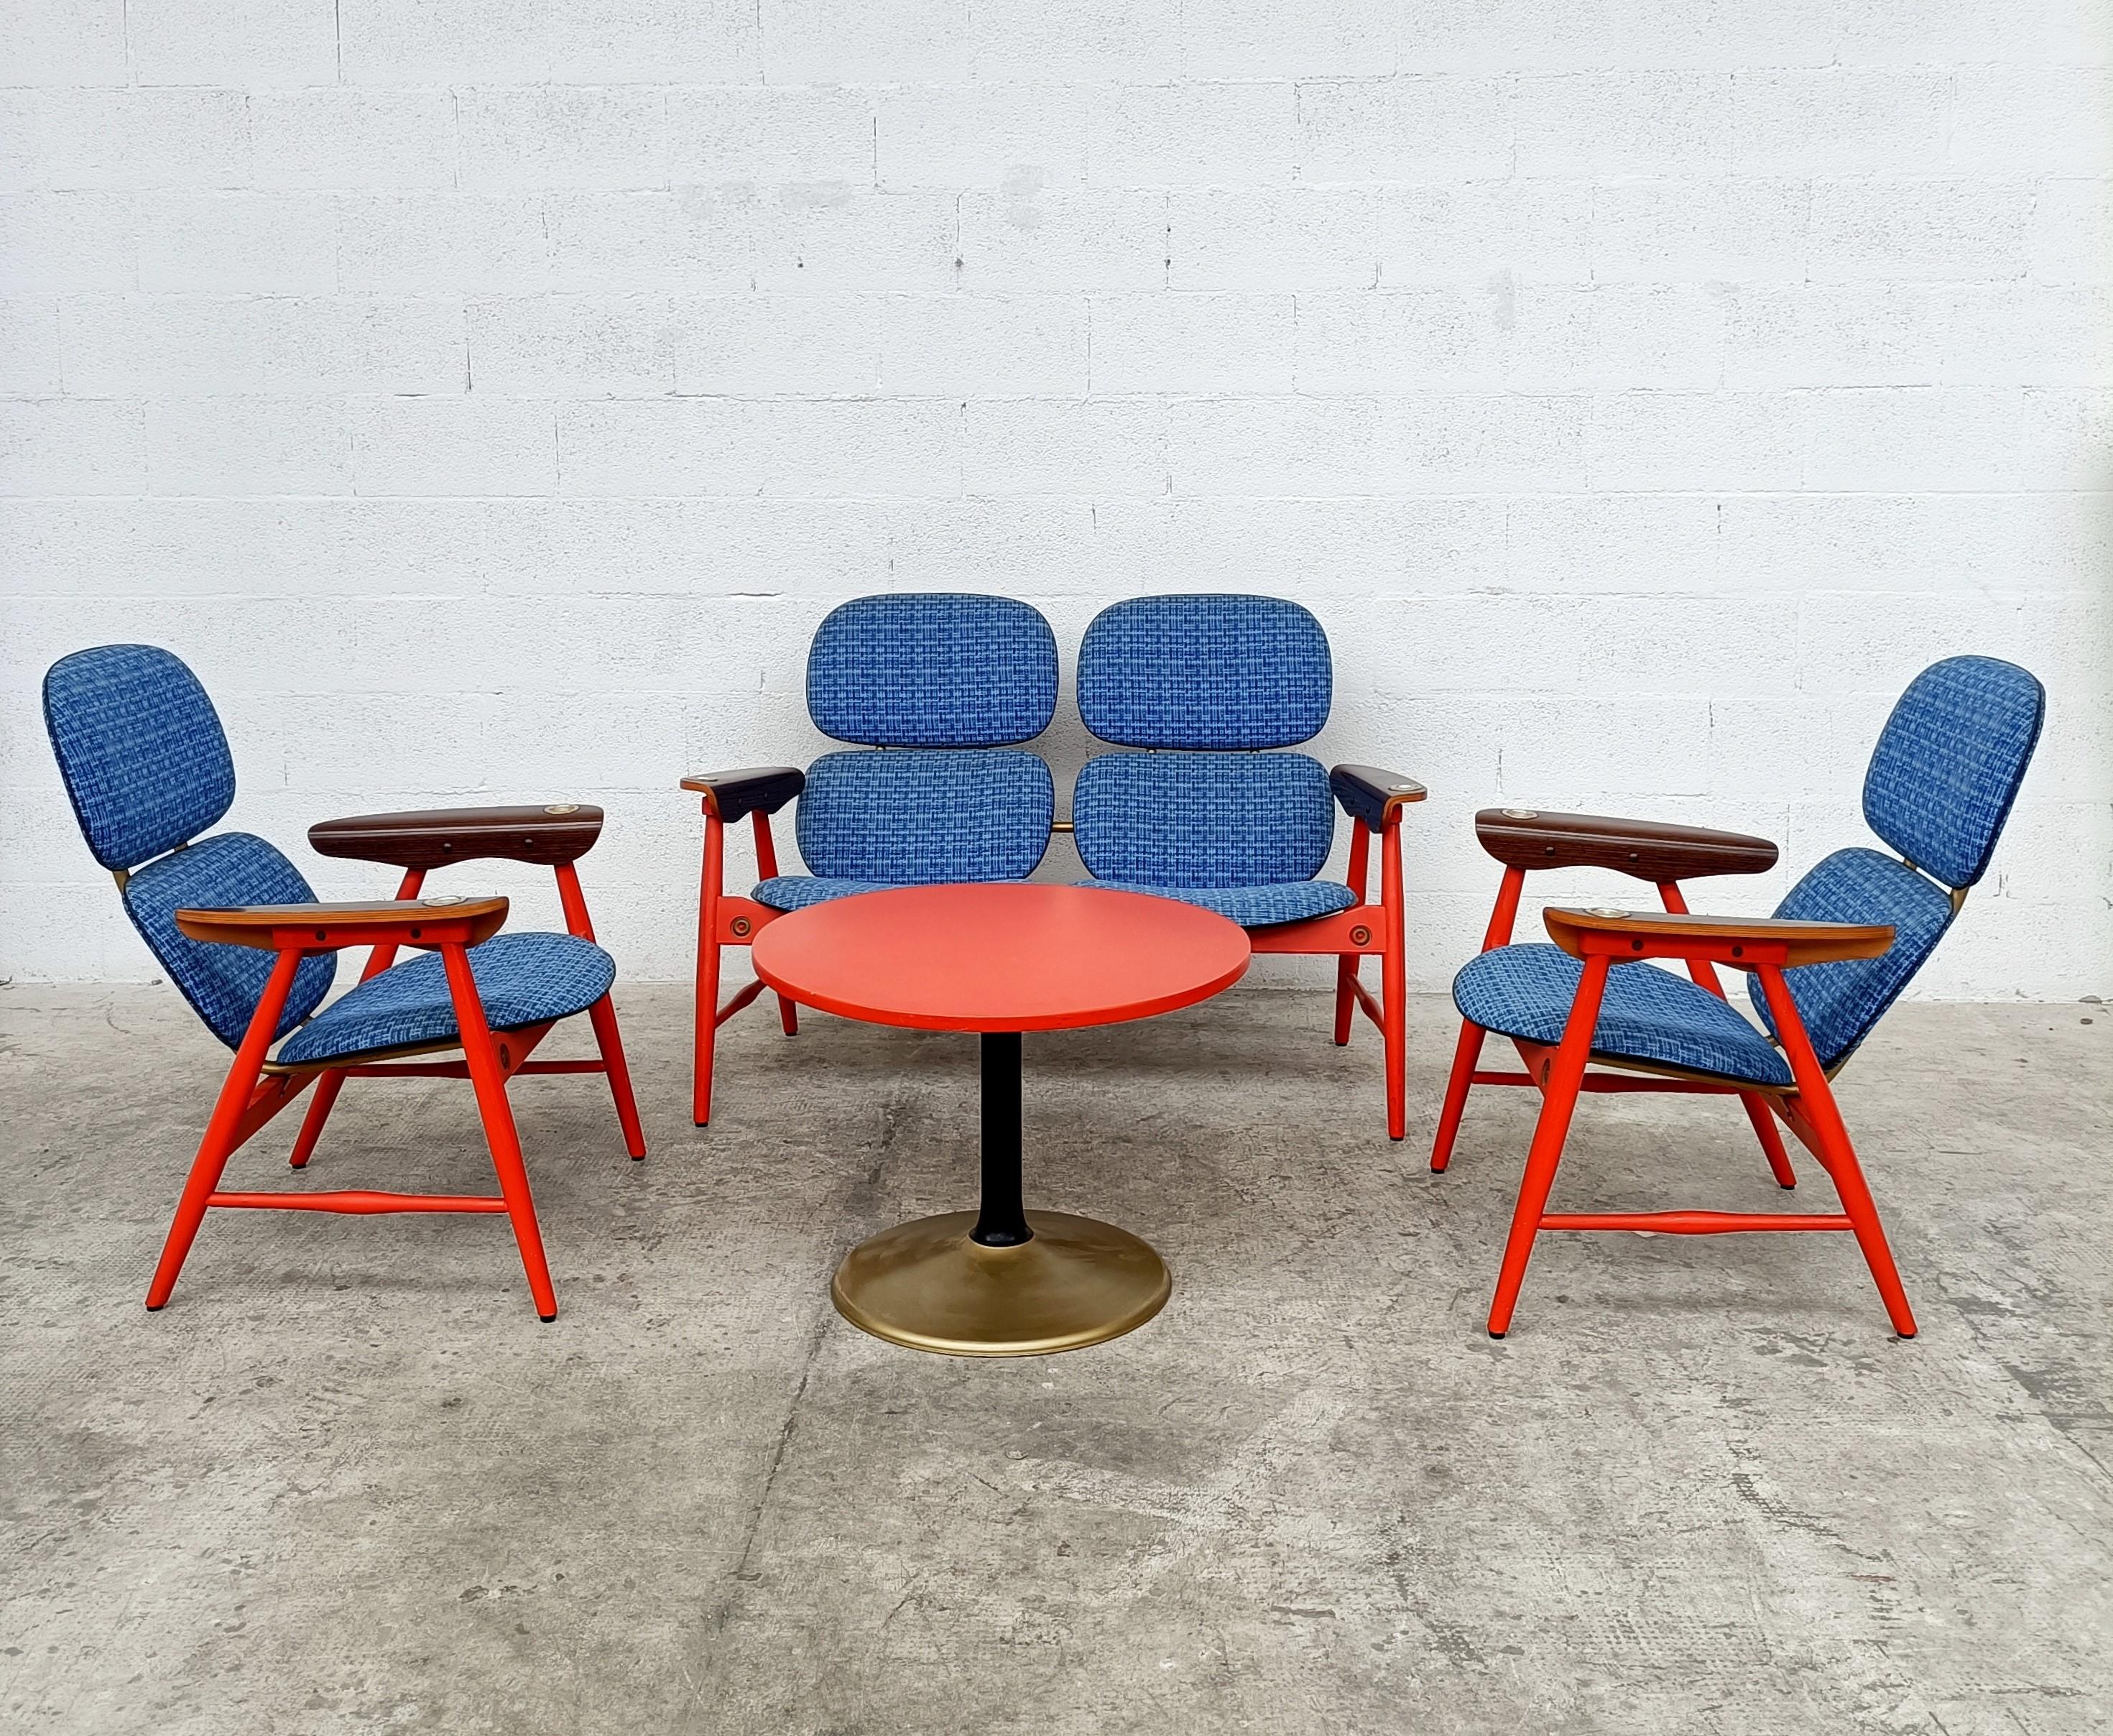 Astonishing living room set, composed by a loveseat, 2 armchairs and a circular coffee table, designed by the architect Marco Zanuso and manufactured by Poltronova in 60s.
The light line and the bright colors make this set elegant and cheerful at